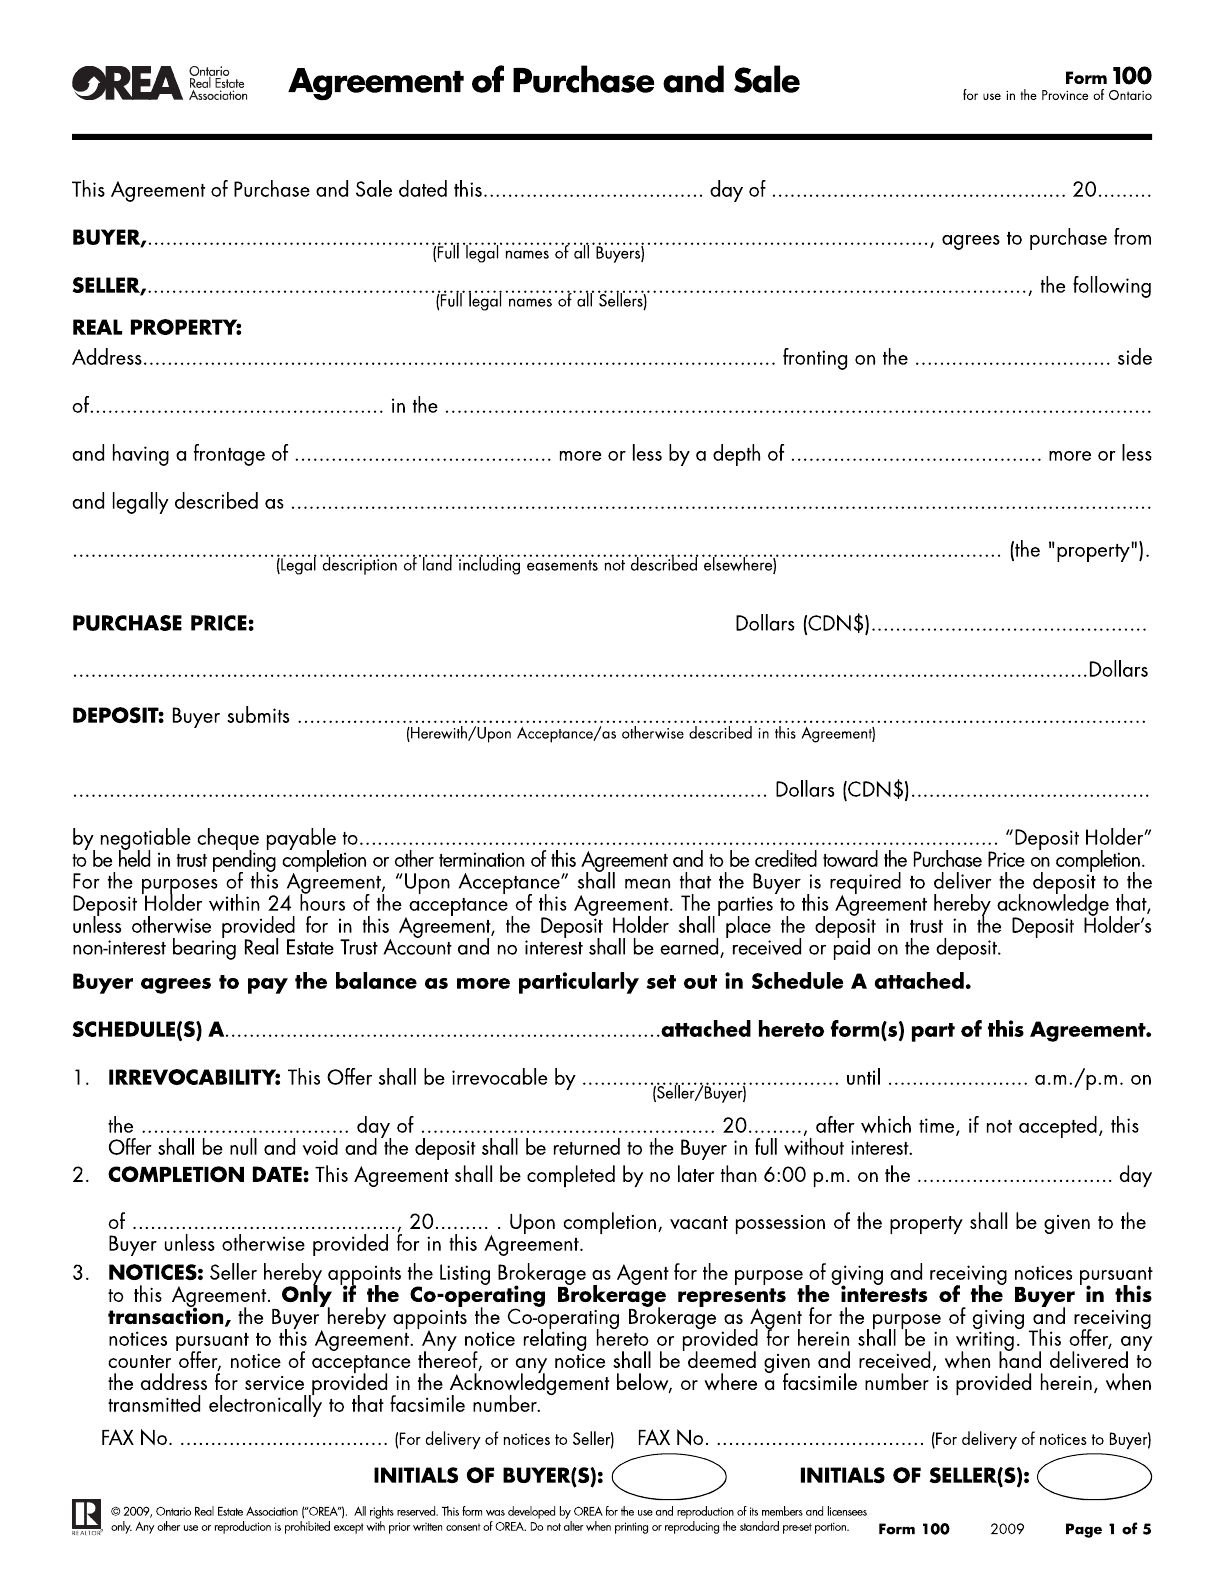 free-ontario-agreement-of-purchase-and-sale-form-pdf-1796kb-5-page-s